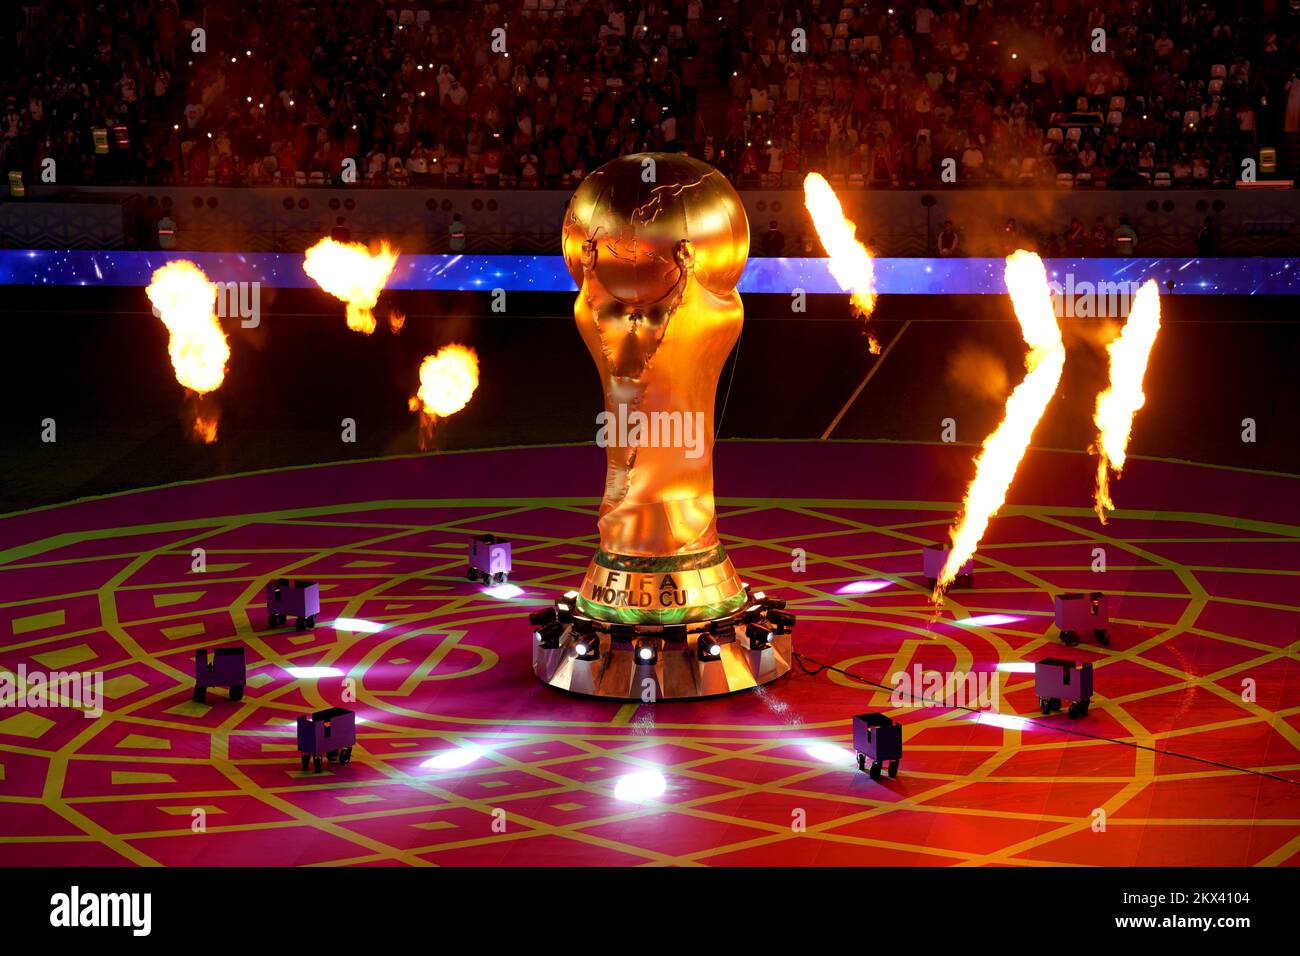 Pyrotechnics go off around a large scale replica of the FIFA World Cup Trophy ahead of the FIFA World Cup Group D match at the Education City Stadium in Al Rayyan, Qatar. Picture date: Wednesday November 30, 2022. Stock Photo